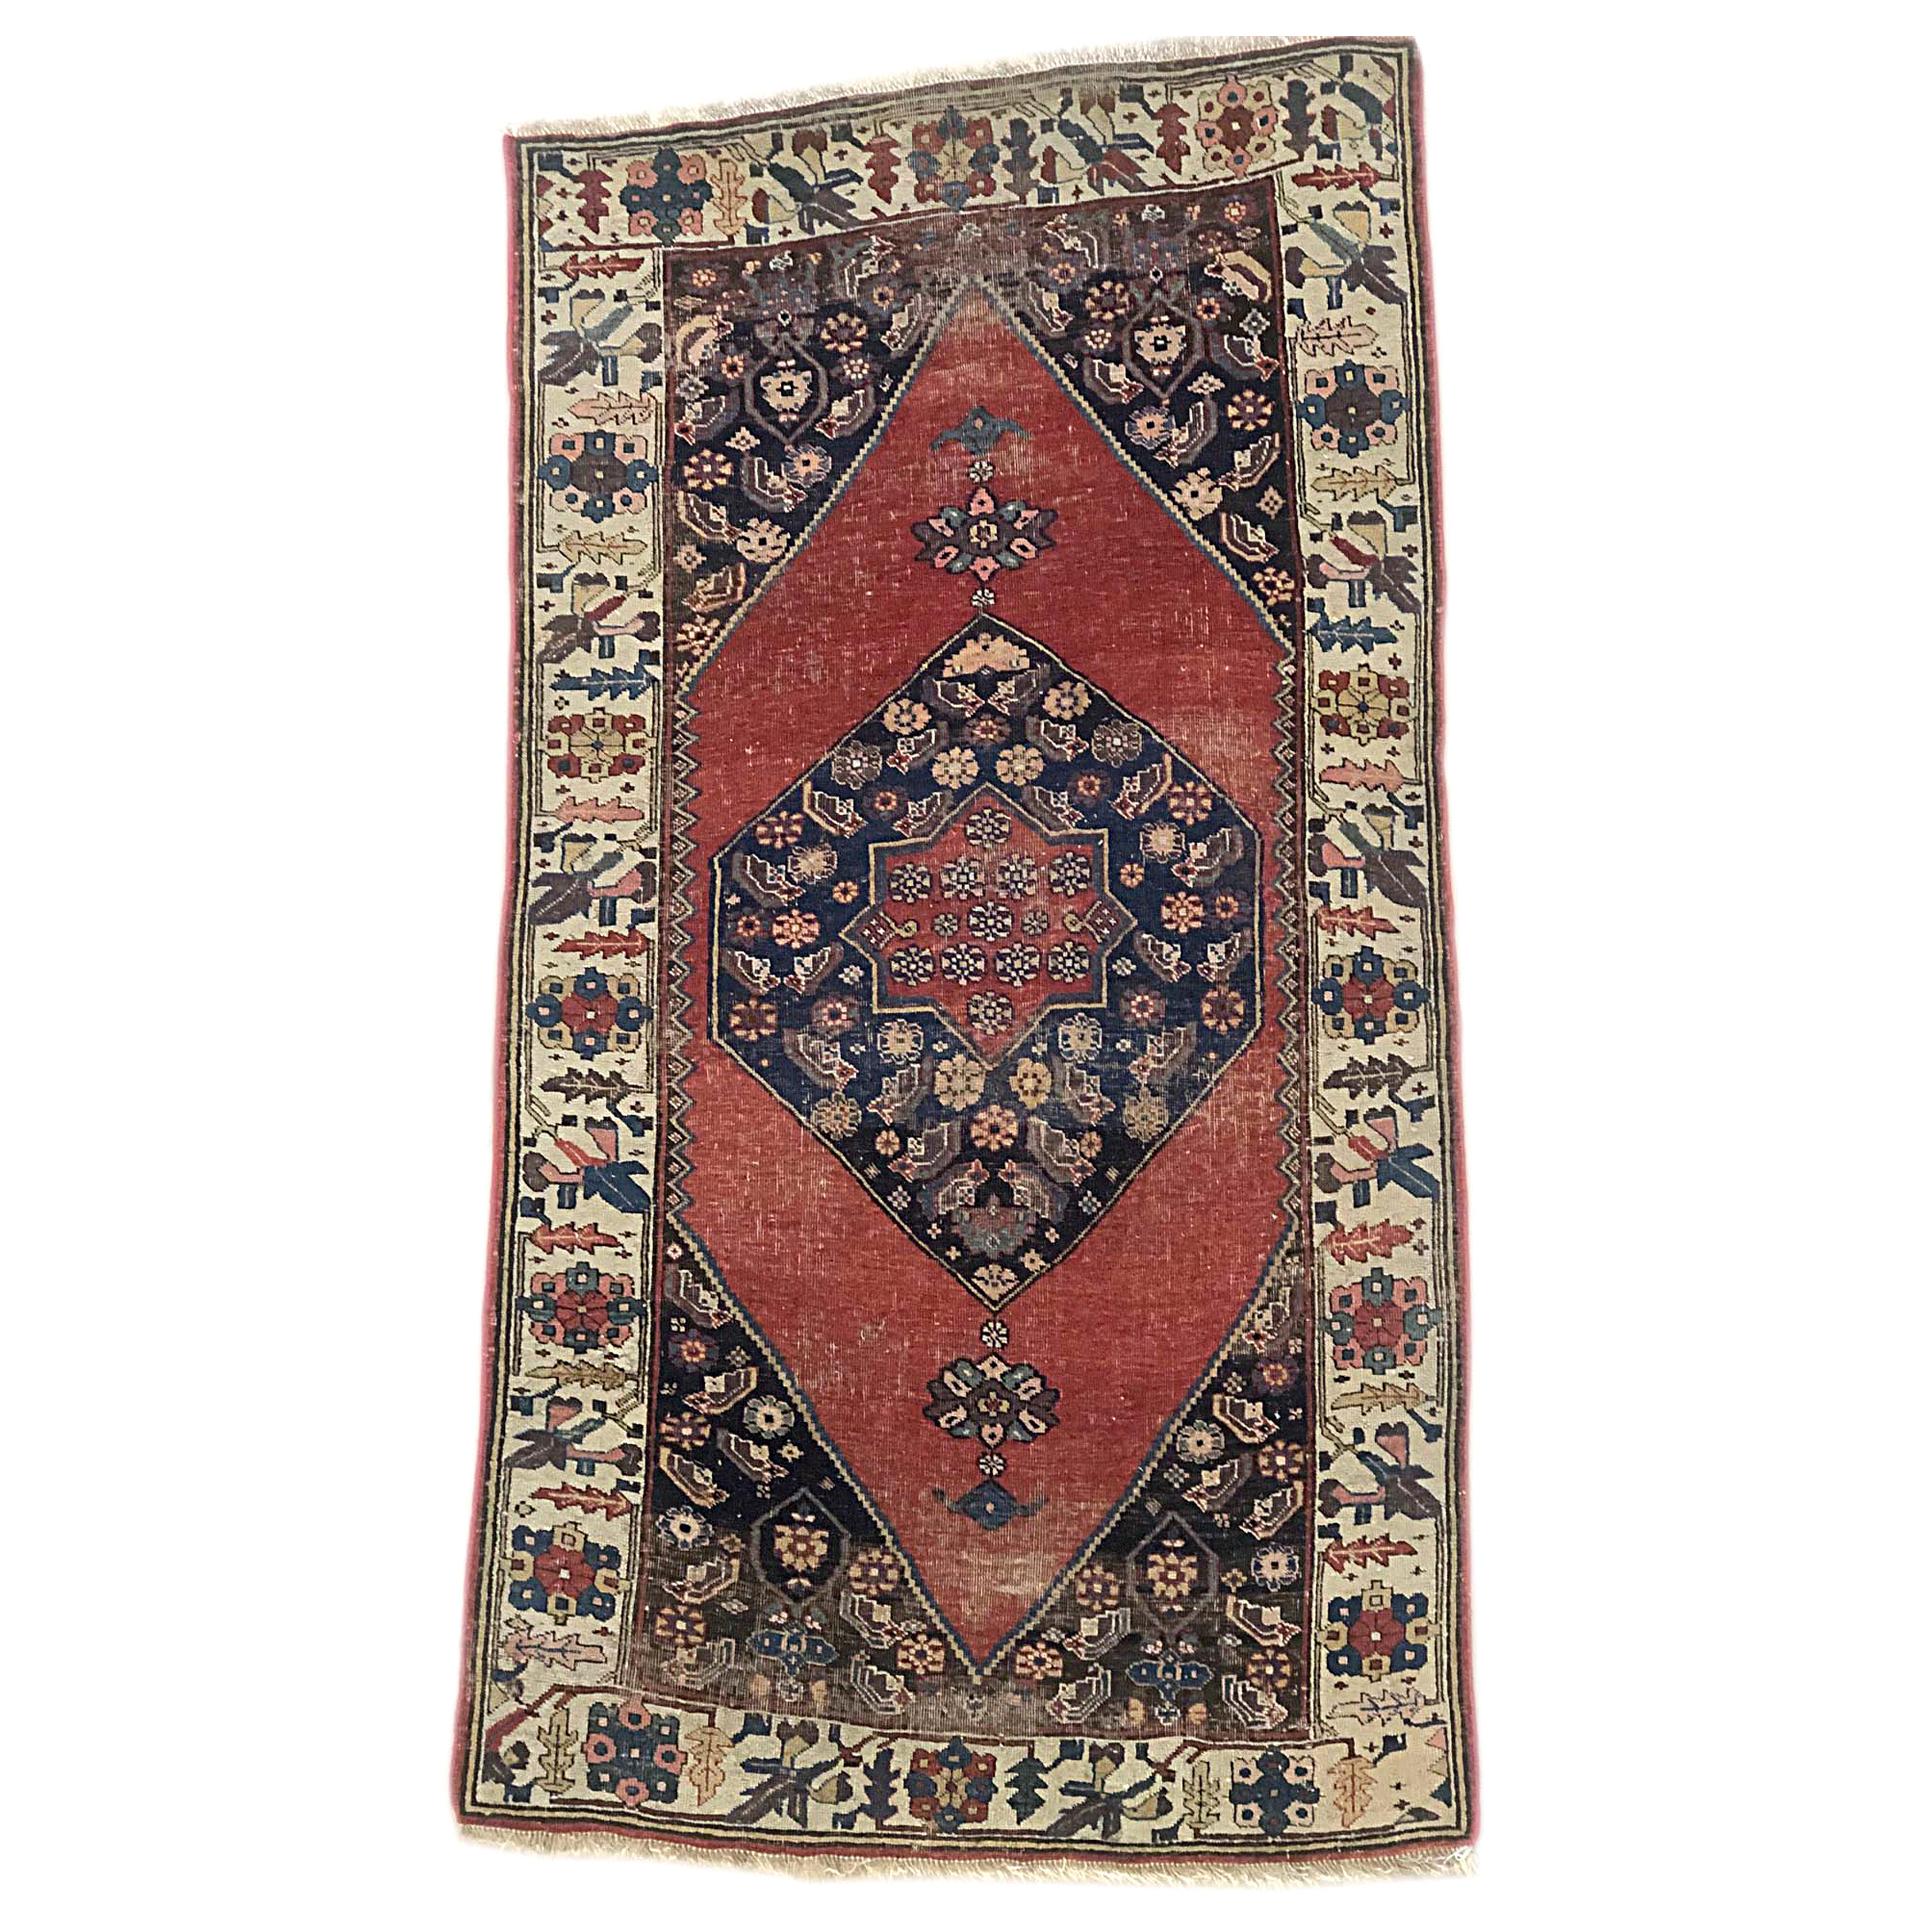 Authentic Persian Hand Knotted Antique Bijar Rug, circa 1880